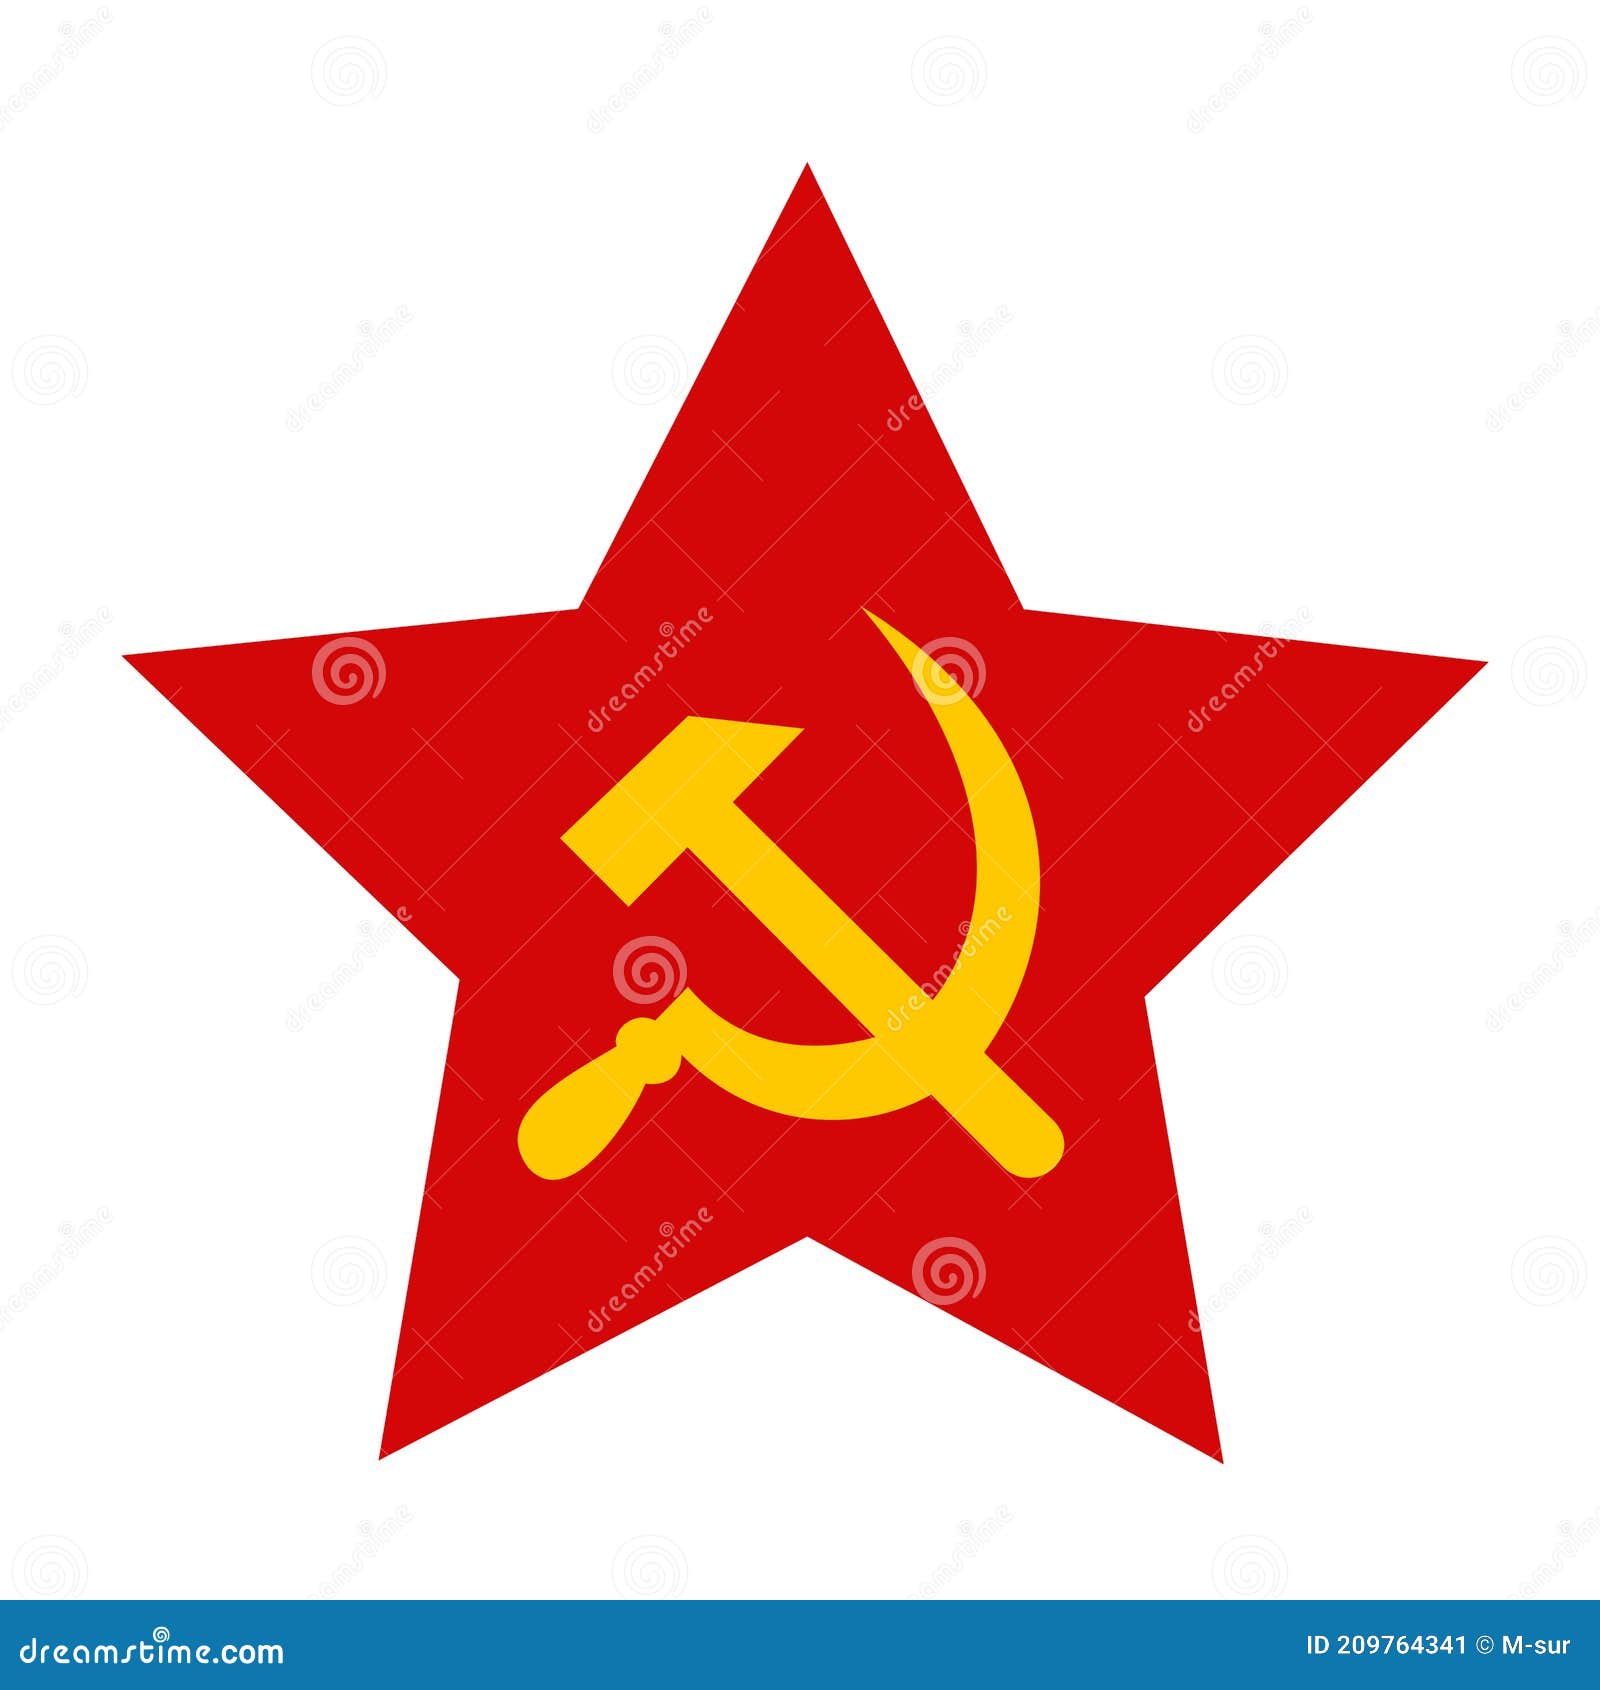 Red Star With Hammer And Sickle - Symbol And Sign Of Communism And ...